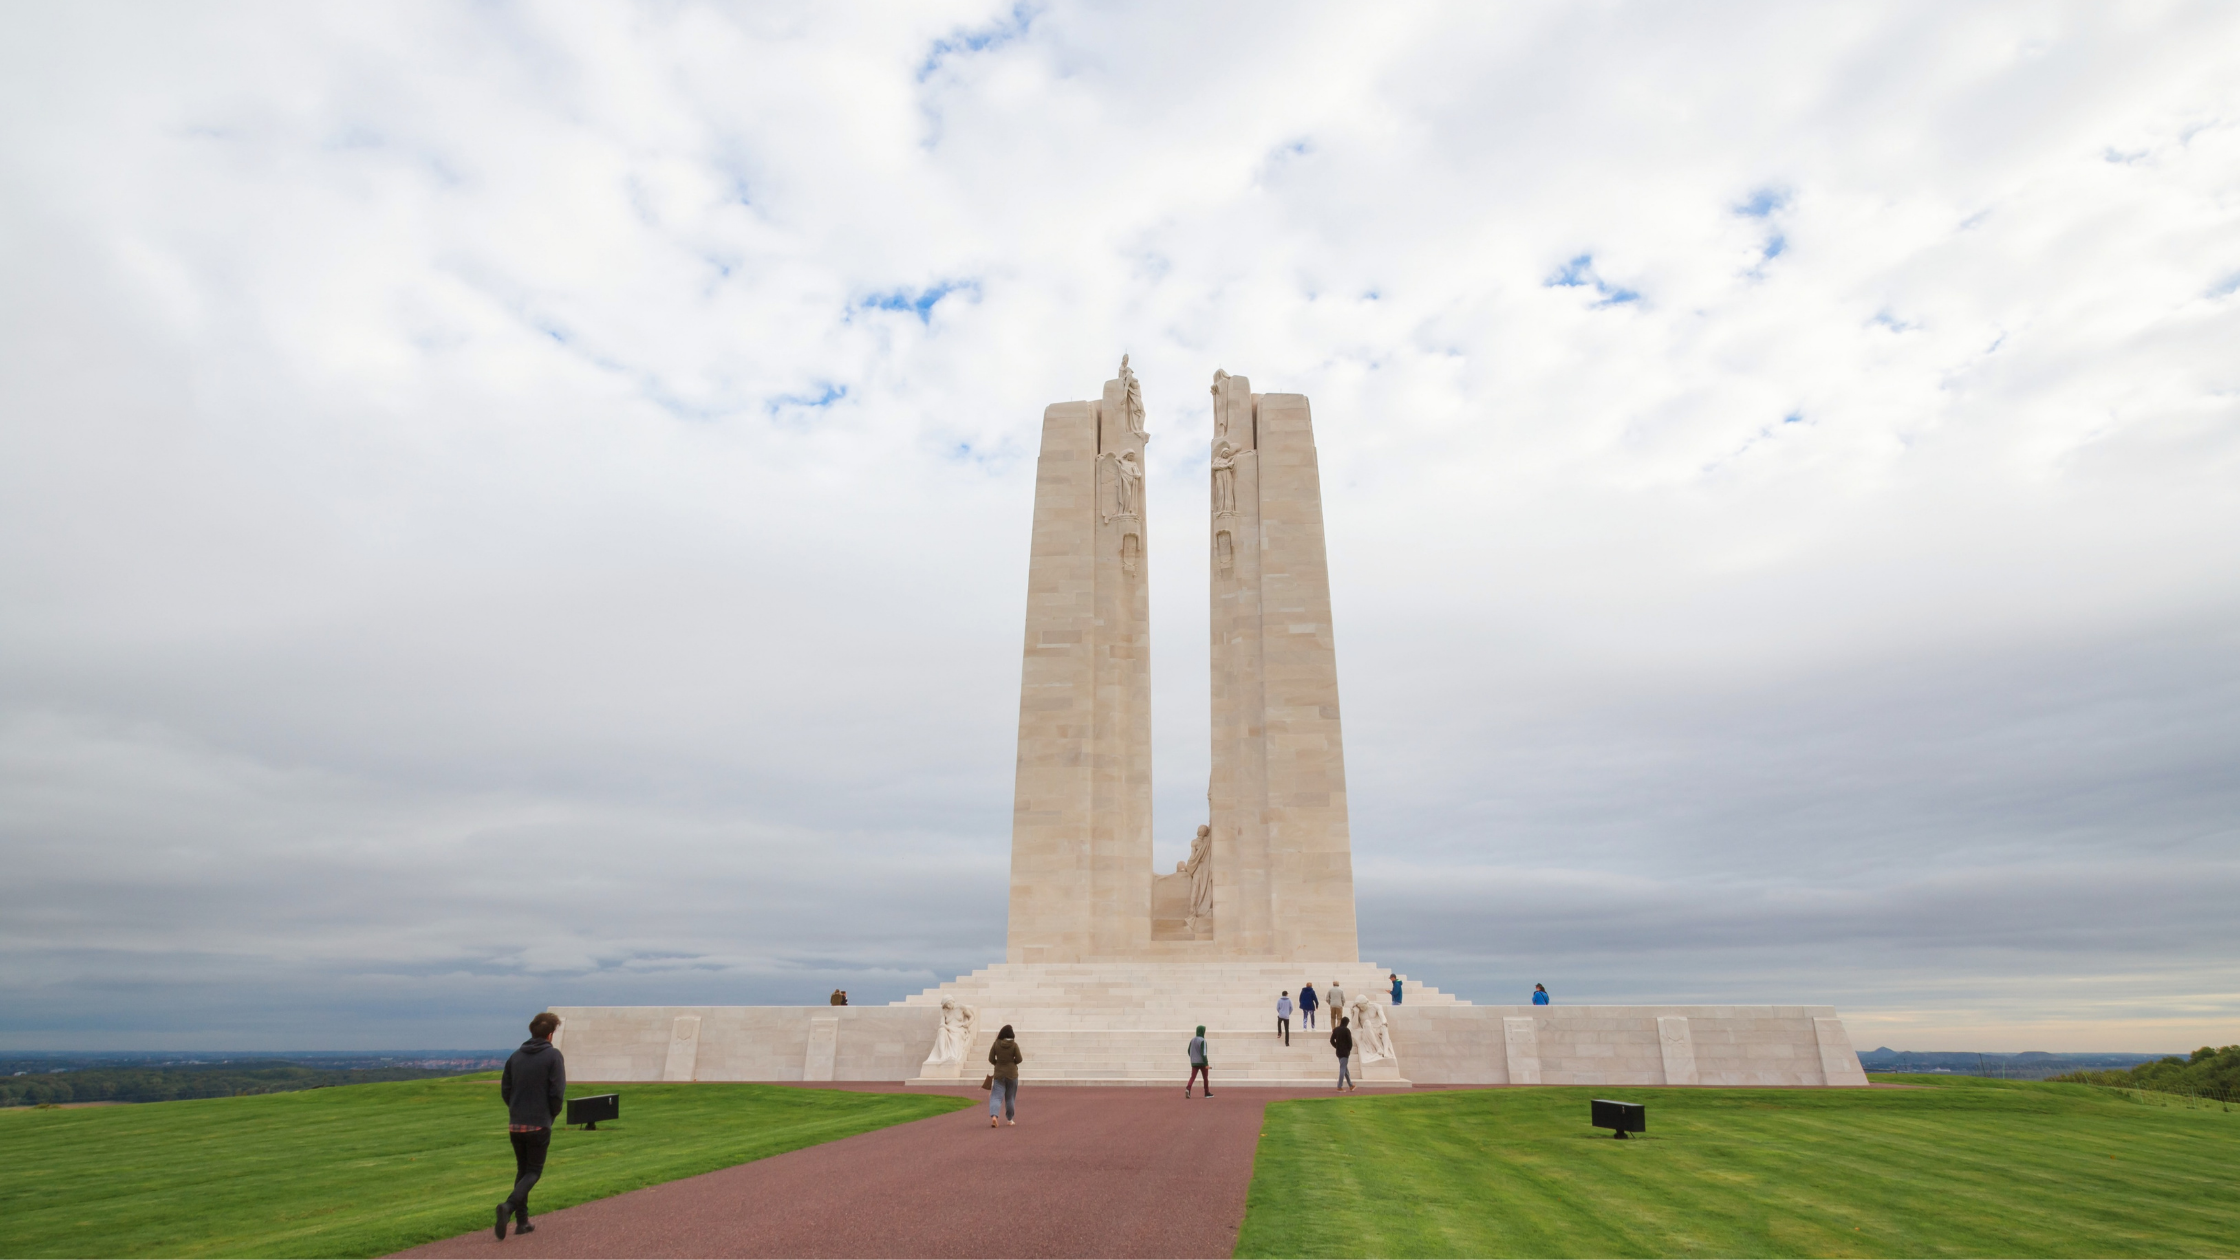 Birth of a Nation: The Battle of Vimy Ridge [Classroom Resources] featured image